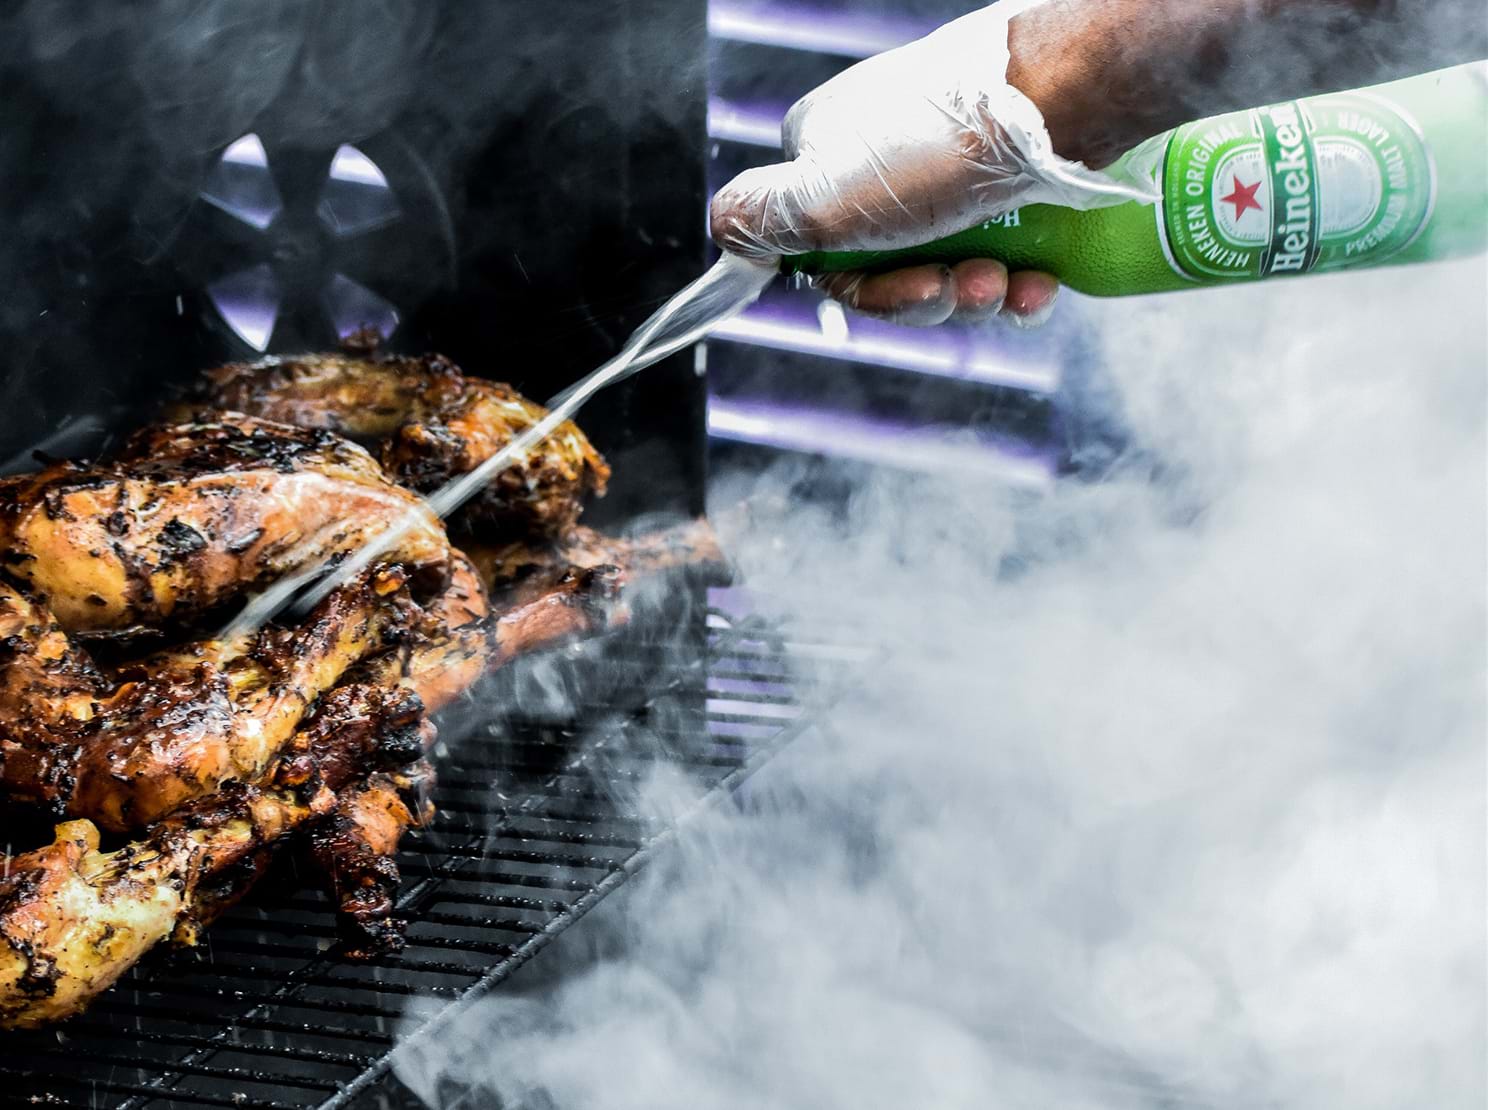 Pouring beer on chicken being grilled